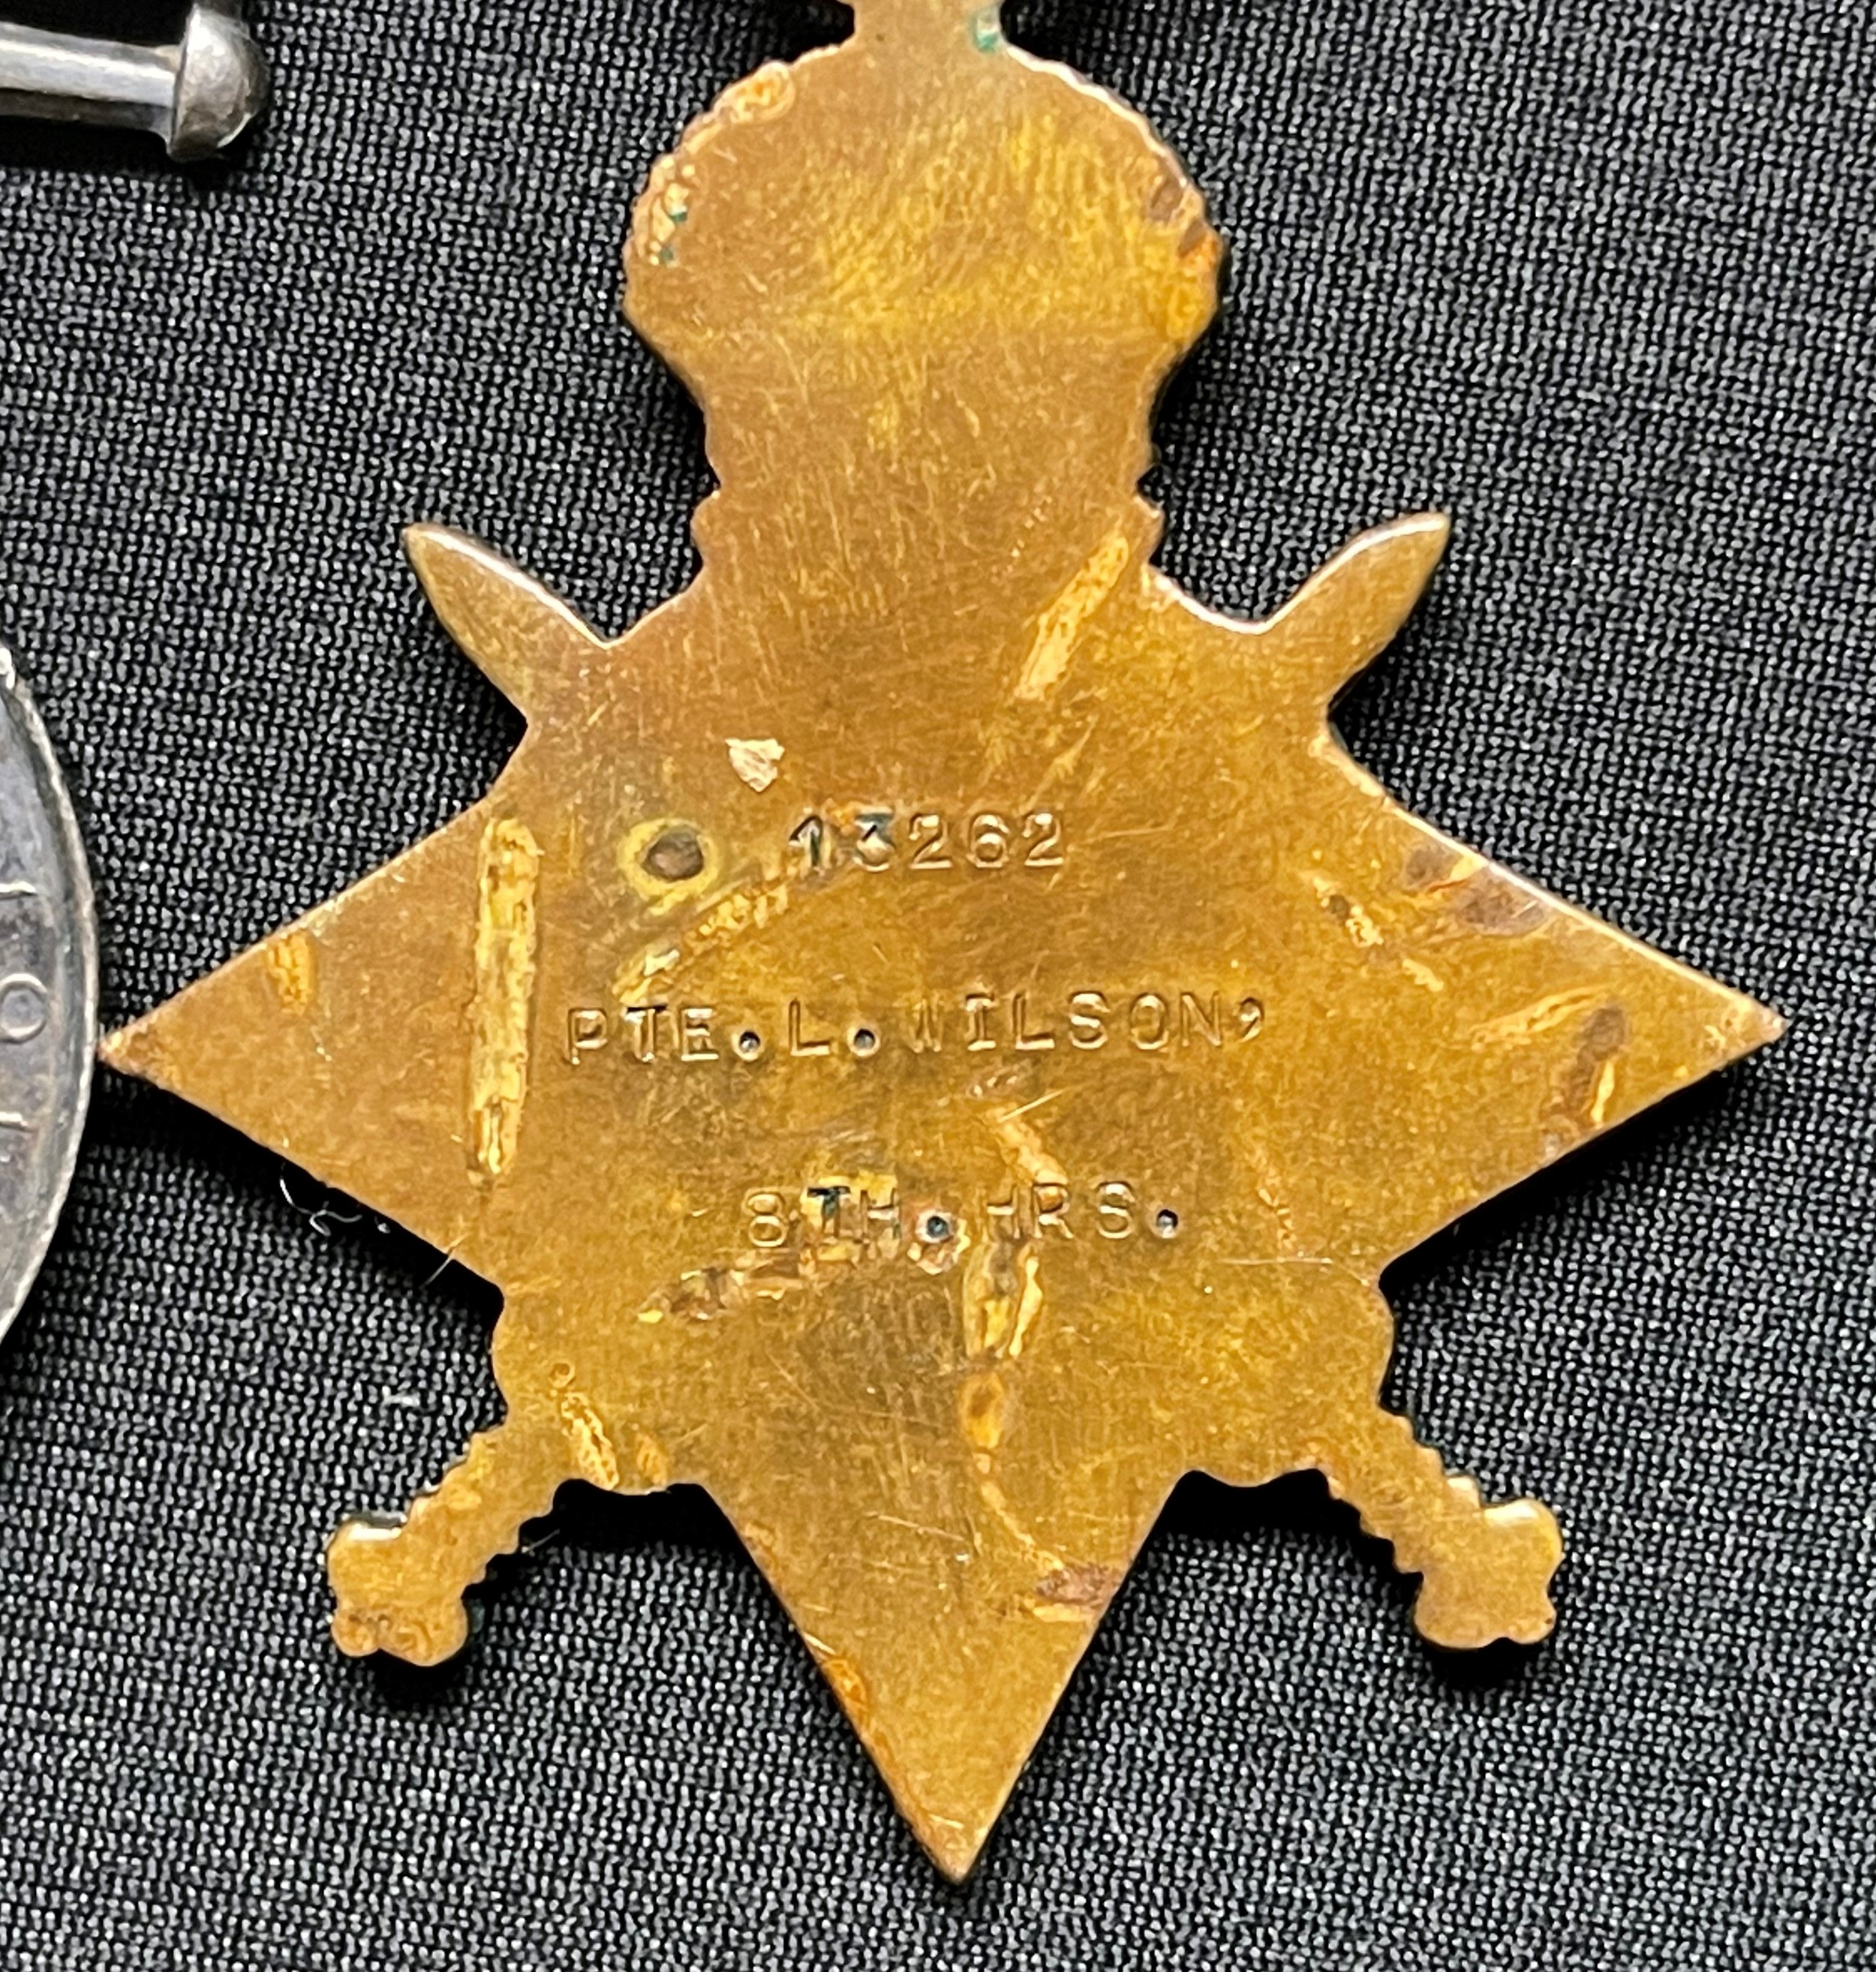 WW1 British Medal group comprising of 1914-15 Star, British War Medal and Victory Medal to 13262 Pte - Image 3 of 4